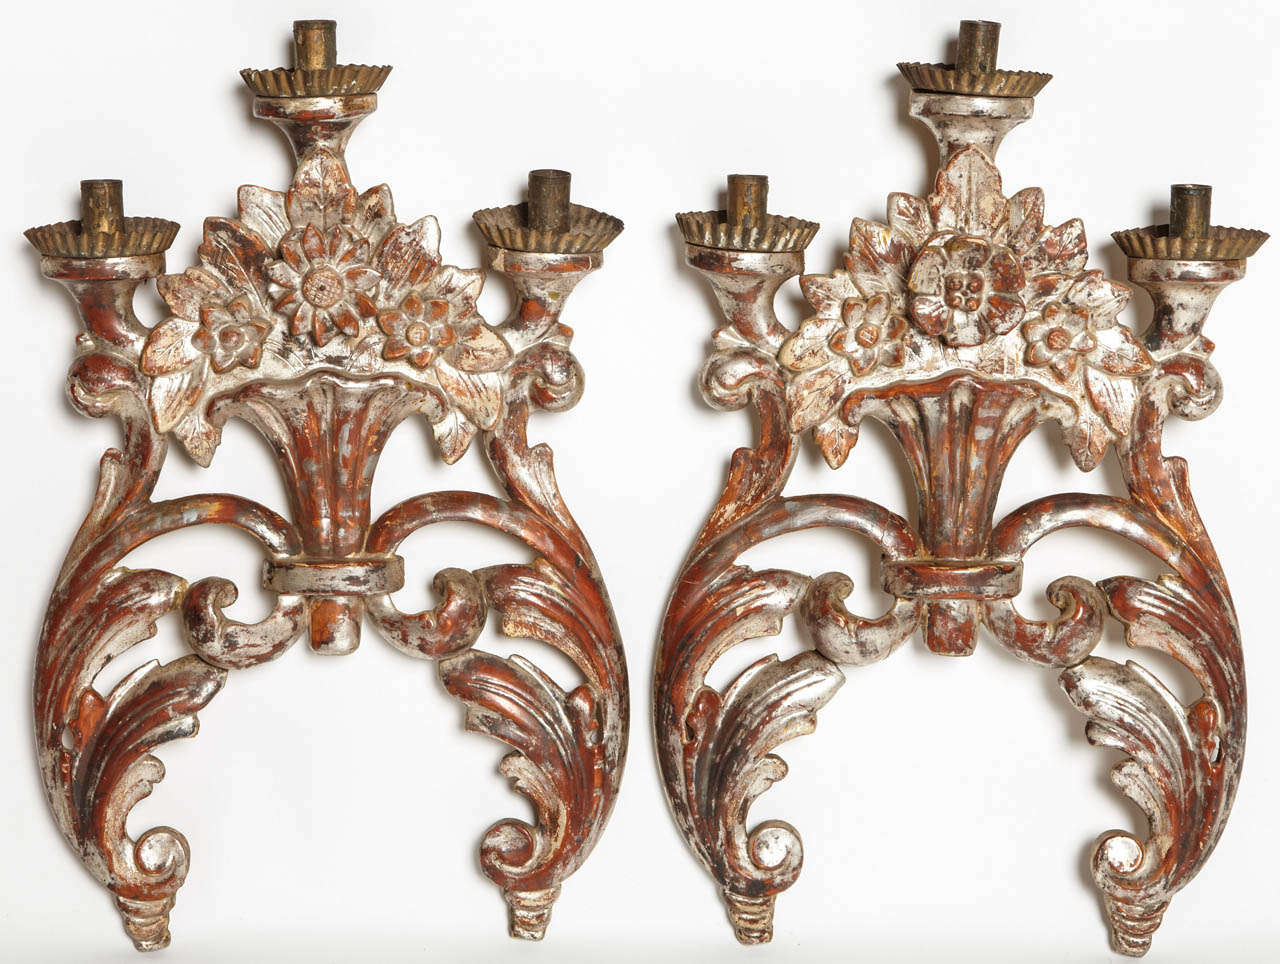 18th century pair of original painted and mecca silver gilt carved sconces
(these sconces can be electrified upon request and are not available individually).